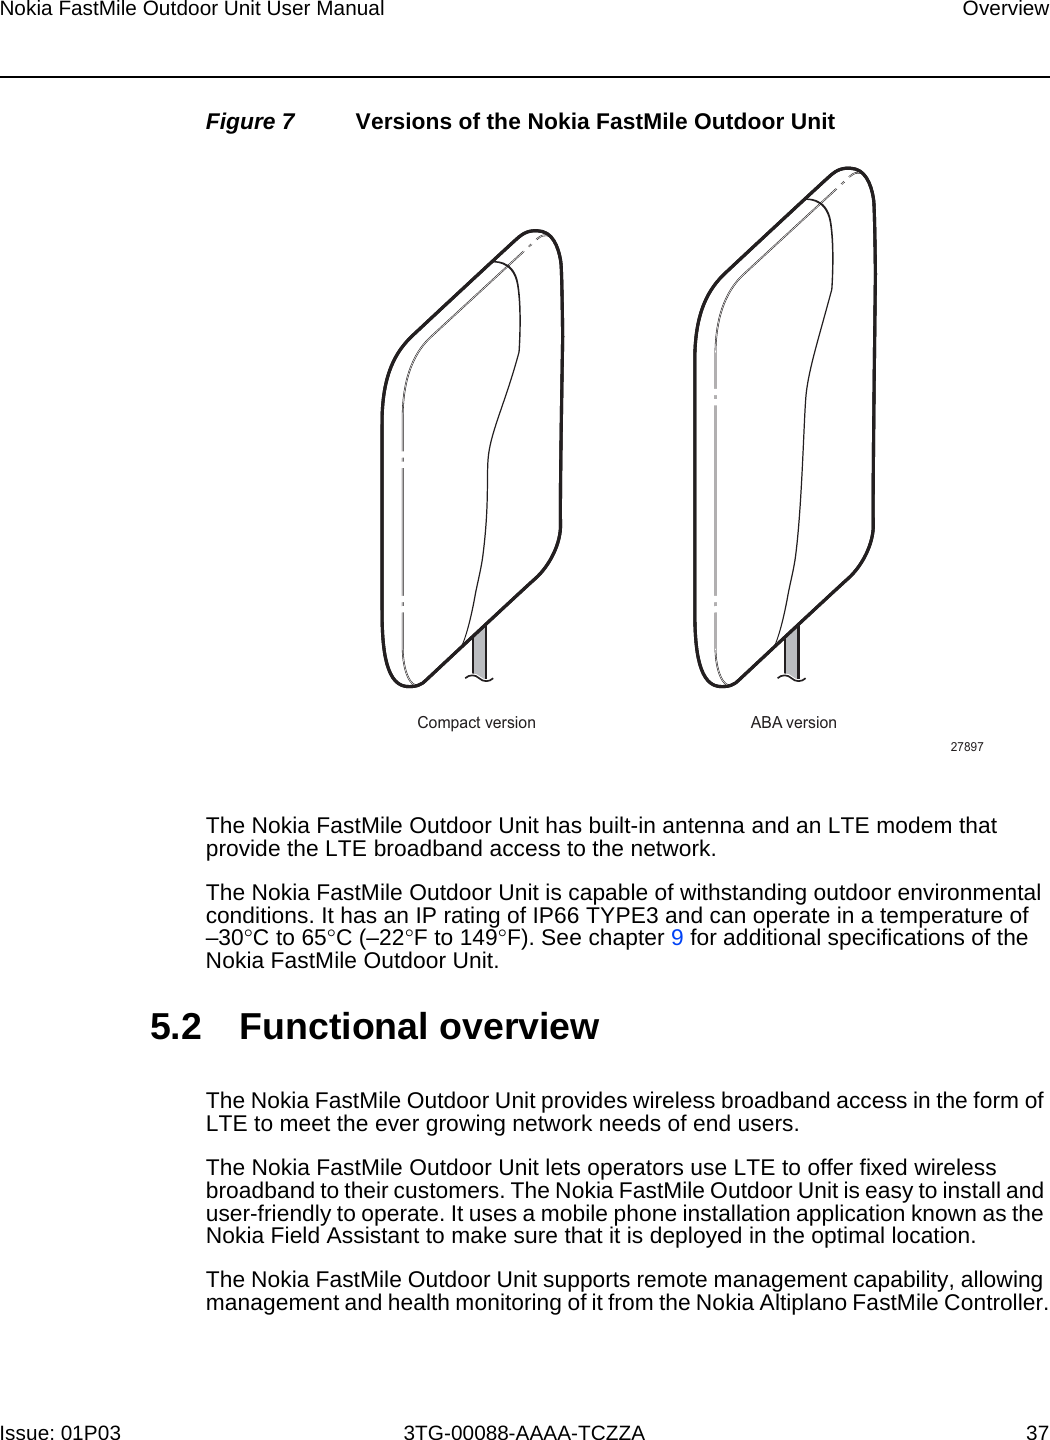 Page 33 of Nokia Bell 34003800FM20 FastMile Compact User Manual Nokia FastMile Outdoor Unit